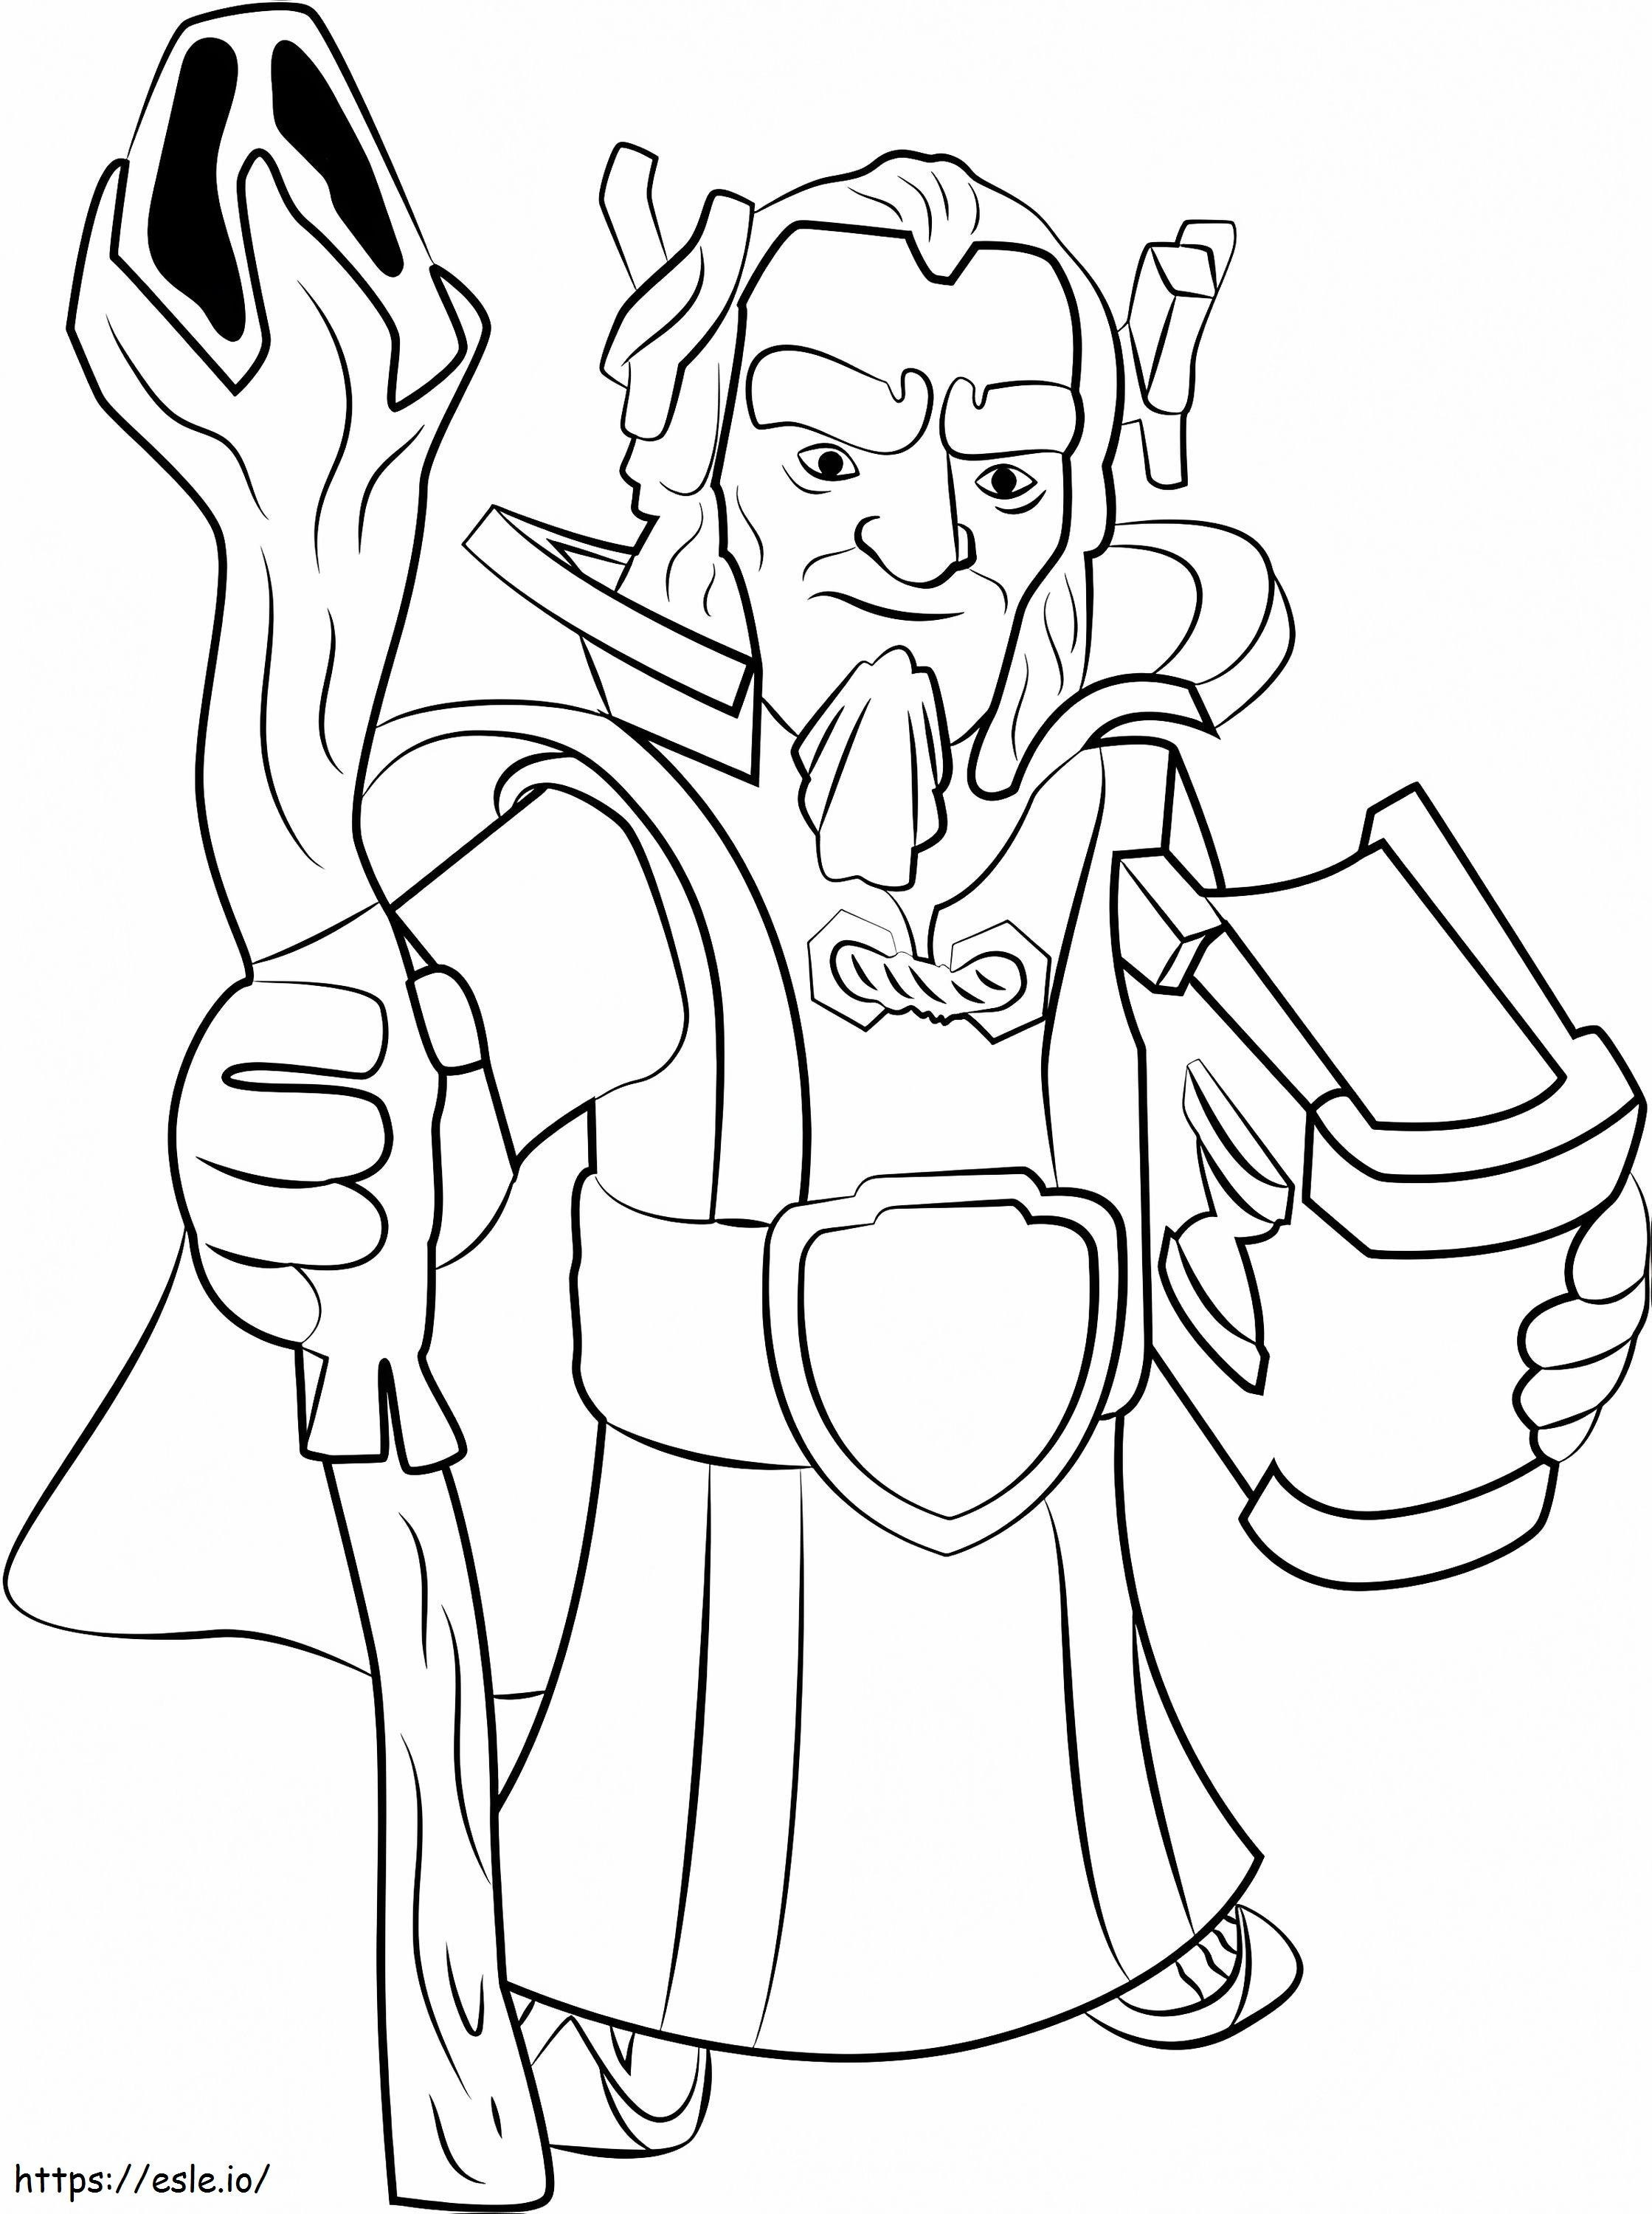 1531448946 Grand Warden A4 coloring page